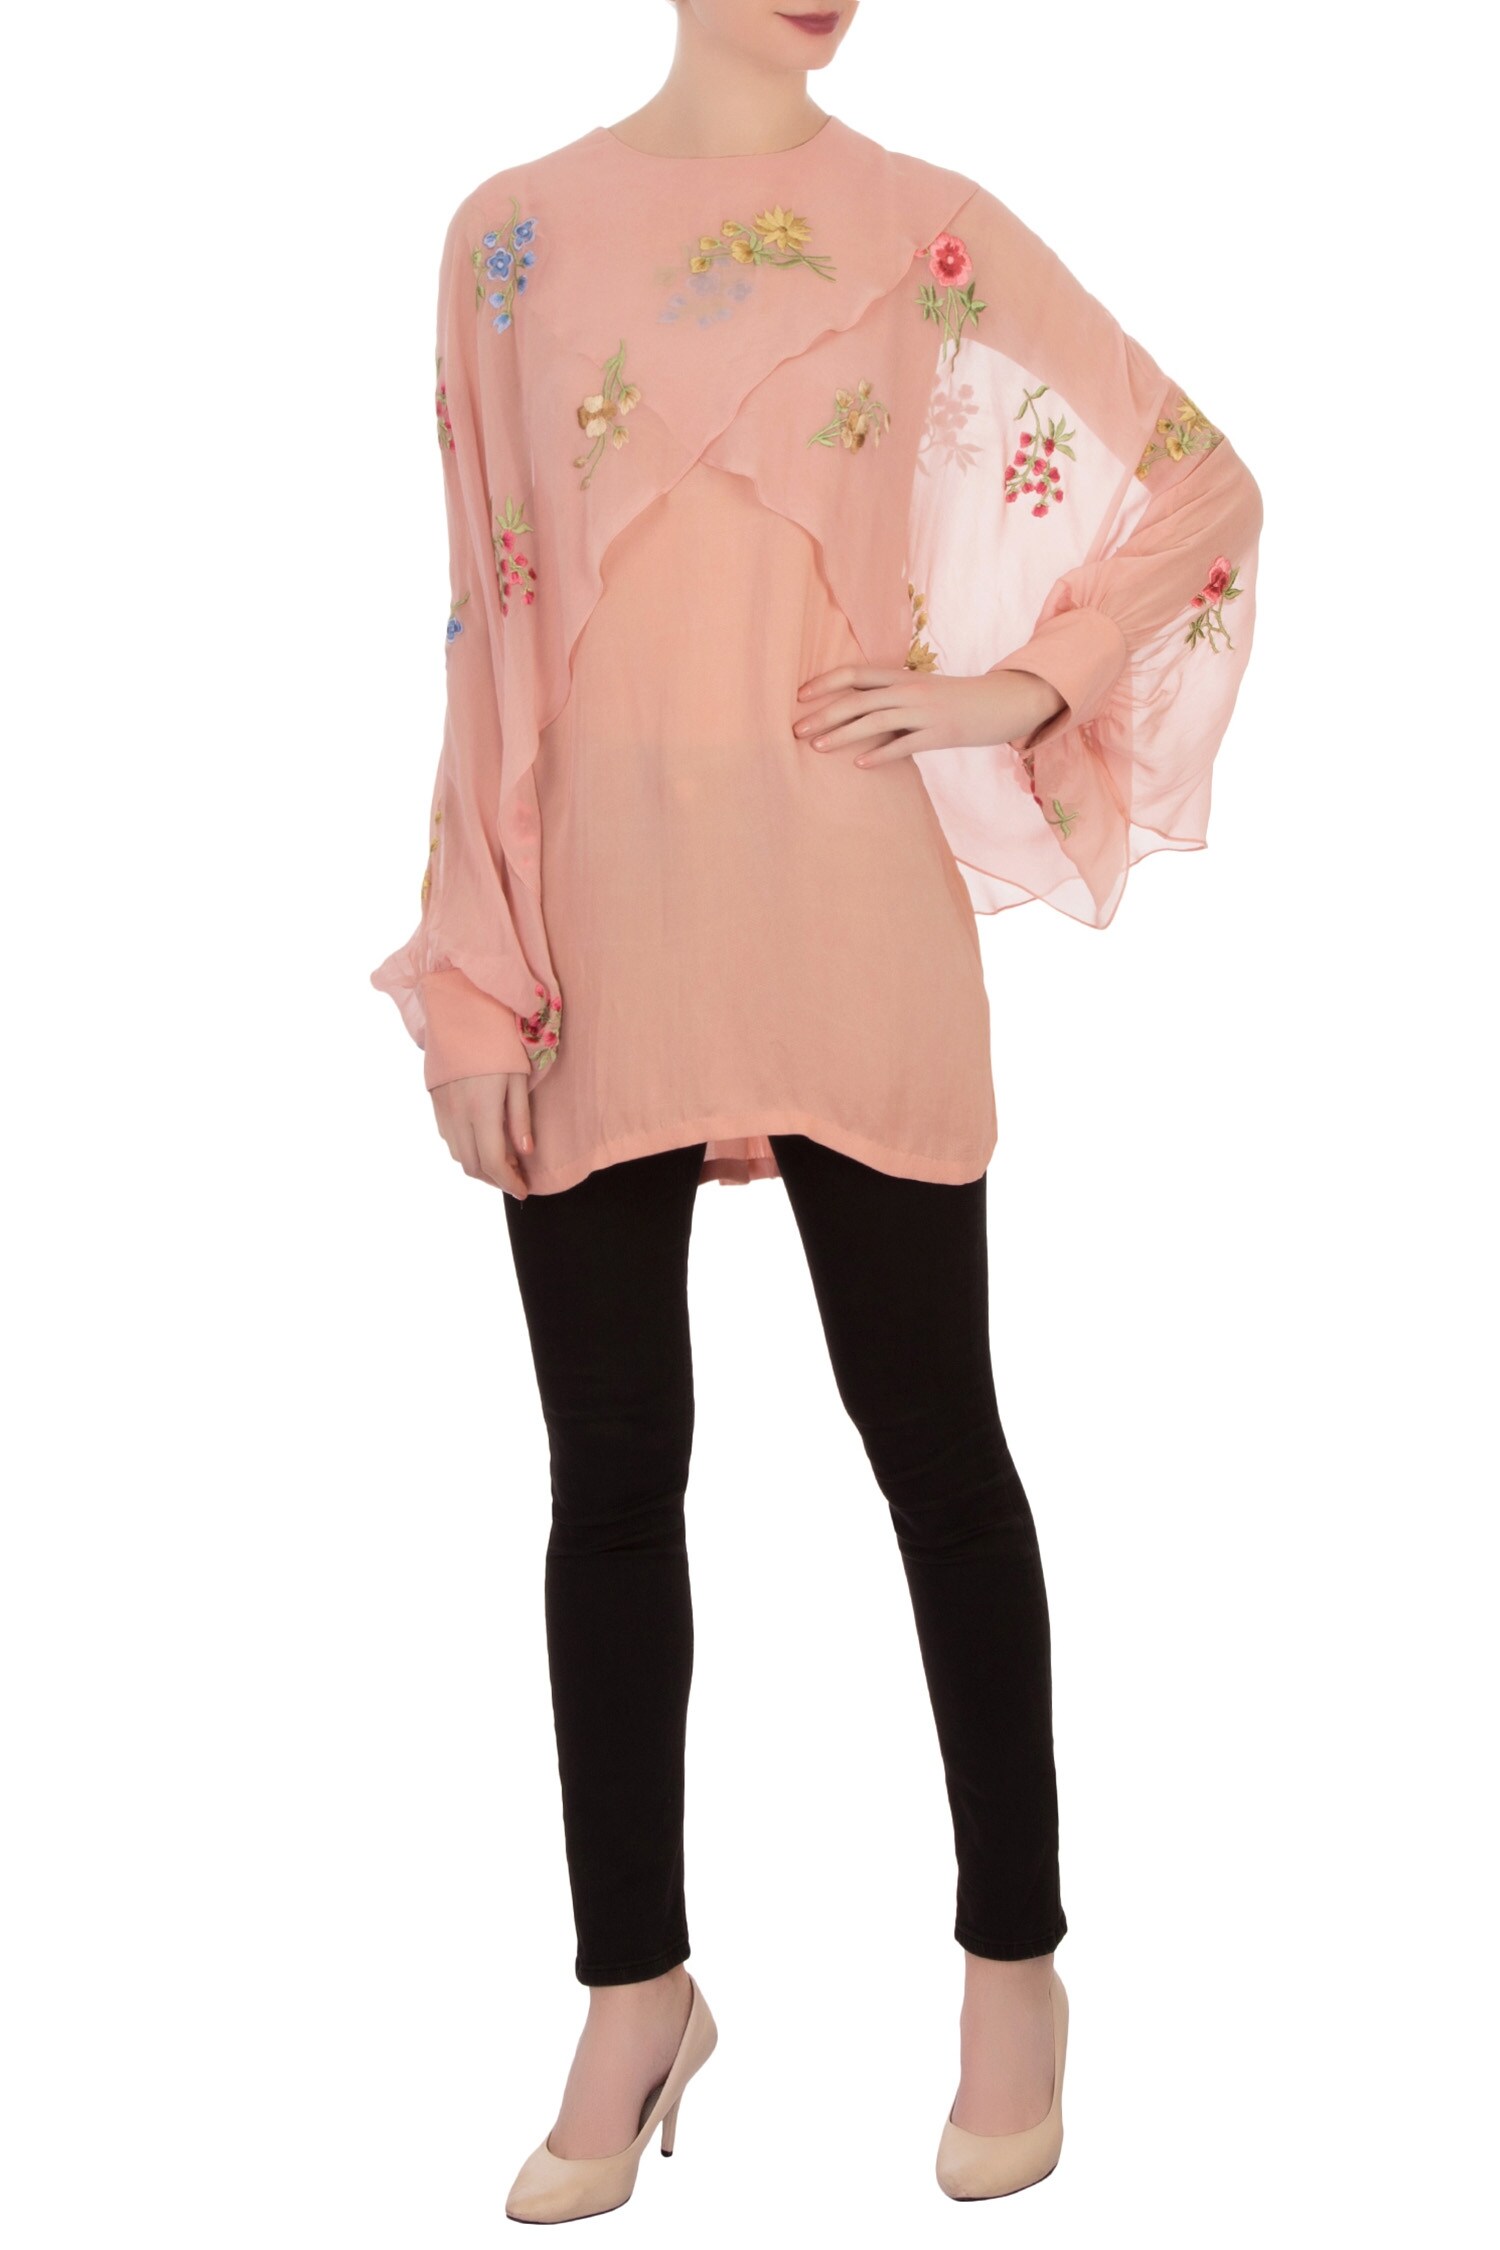 Aqube by Amber Pink Georgette Embroidered Floral Jewel Neck Cape Tunic For Women